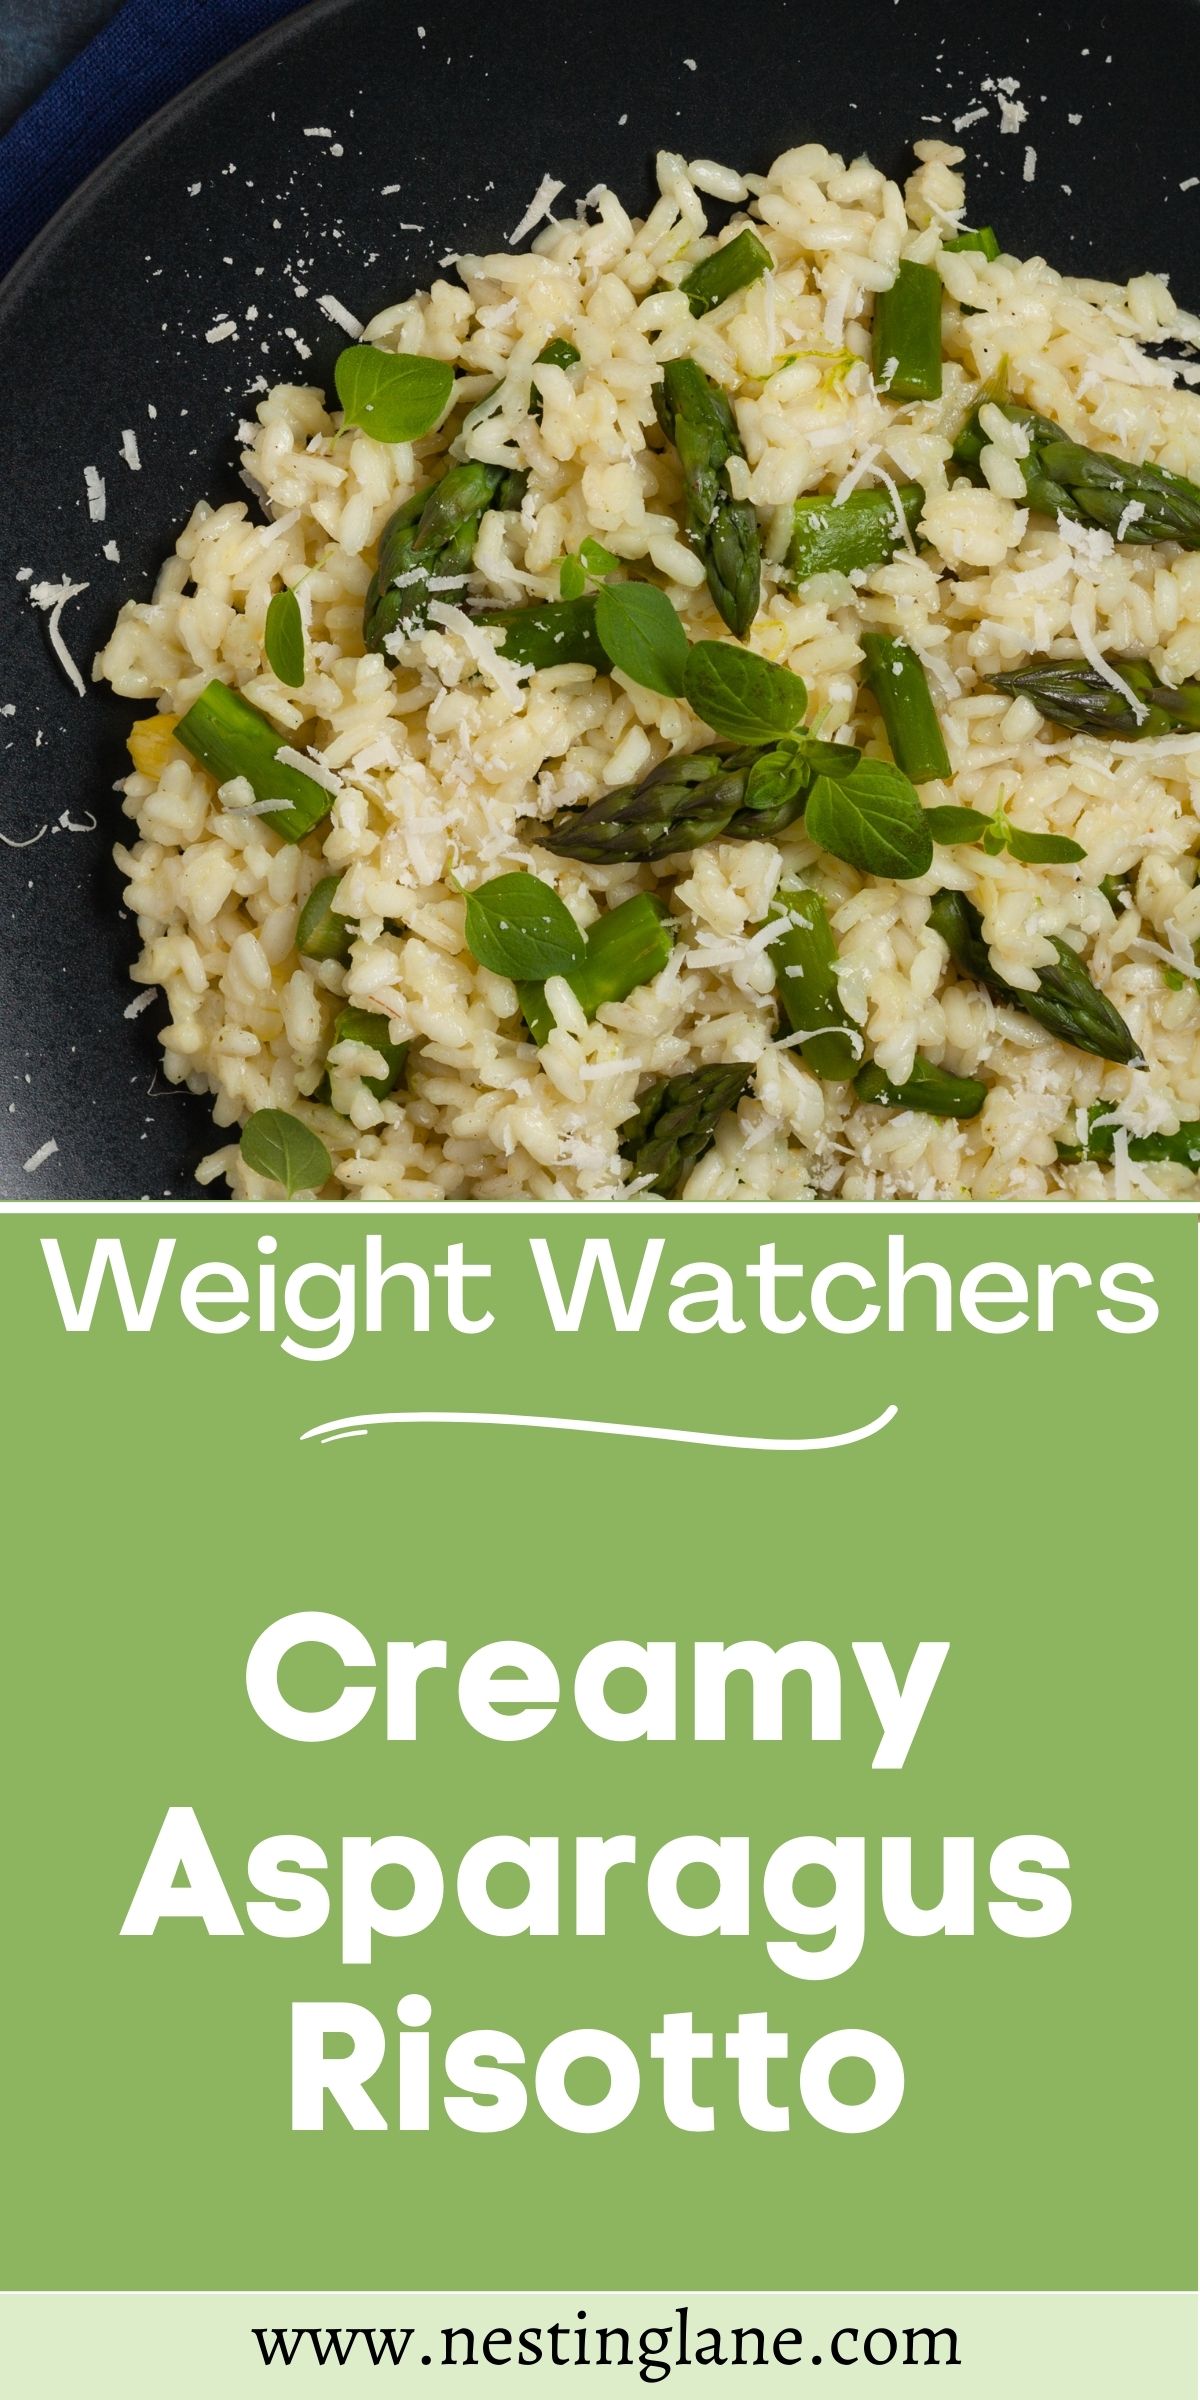 Graphic for Pinterest of Weight Watchers Creamy Asparagus Risotto Recipe.